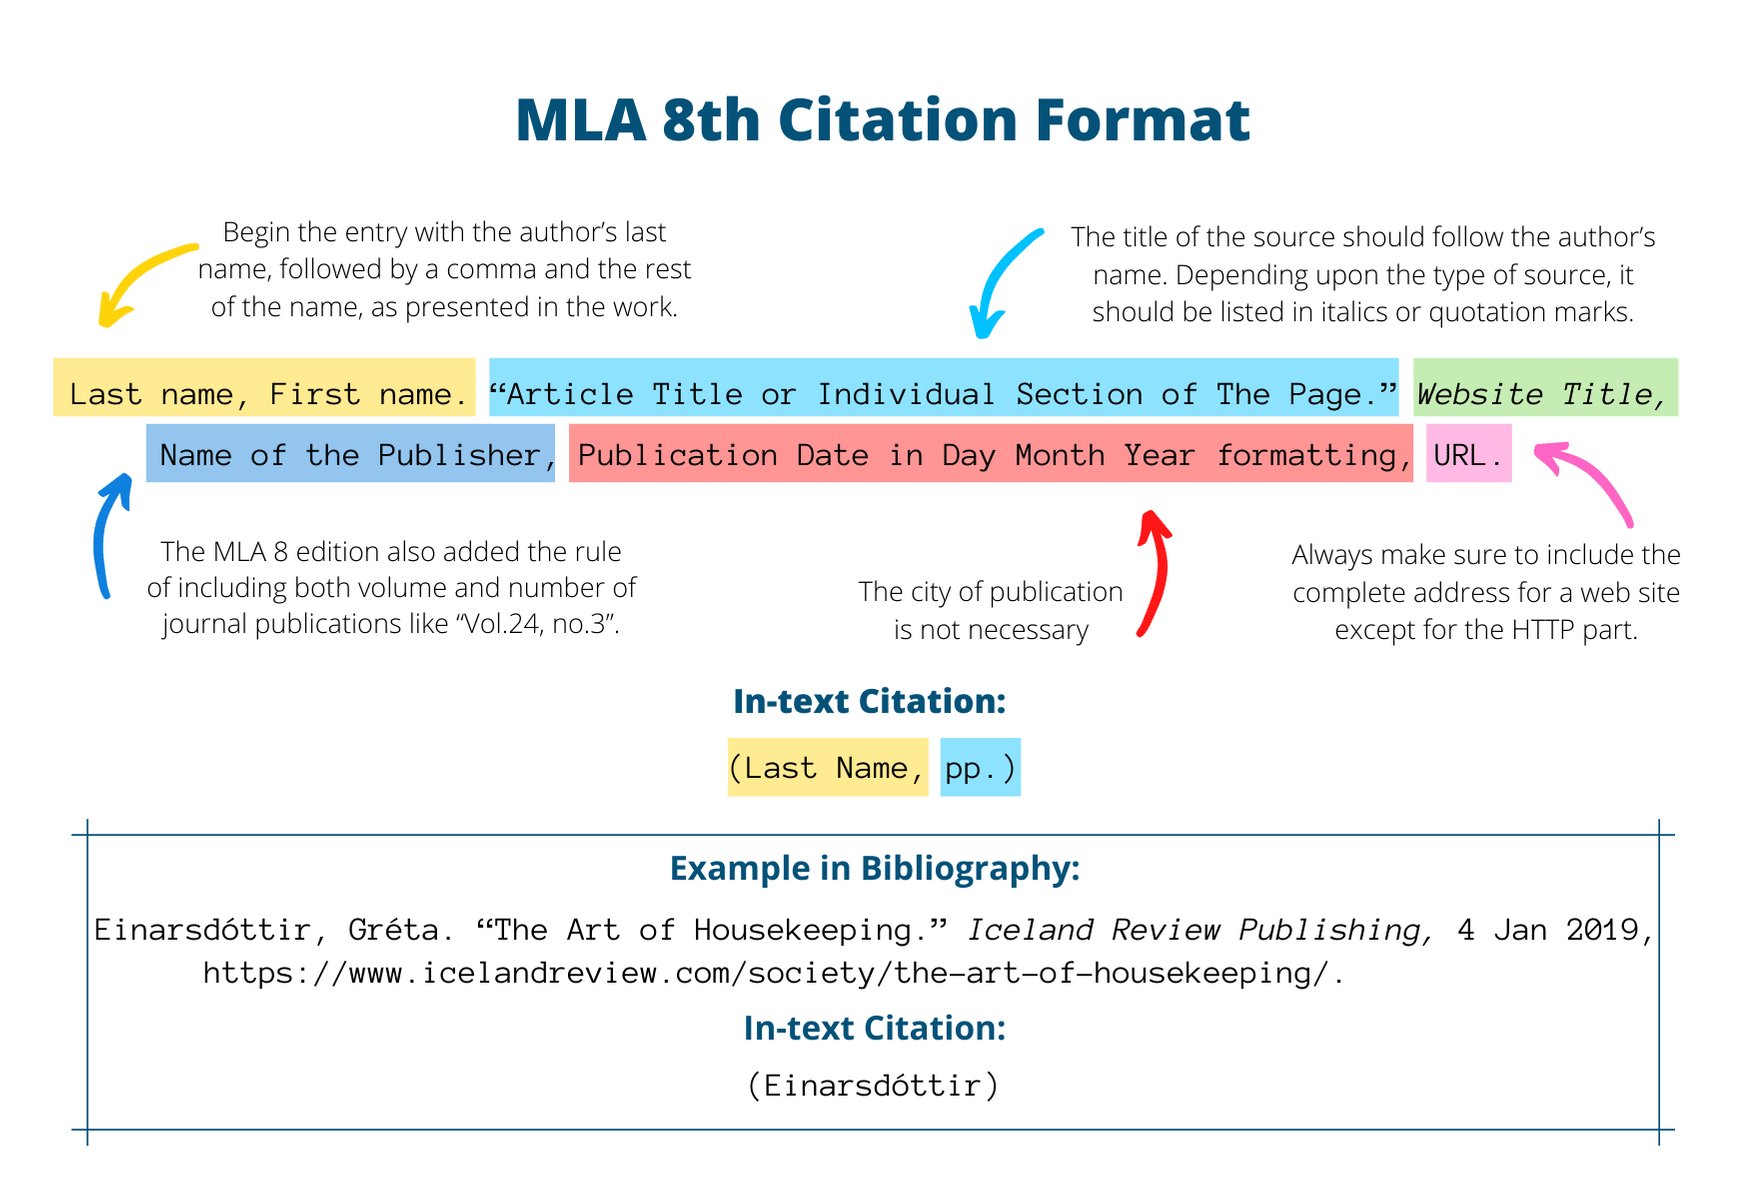 everything's an argument 8th edition mla citation